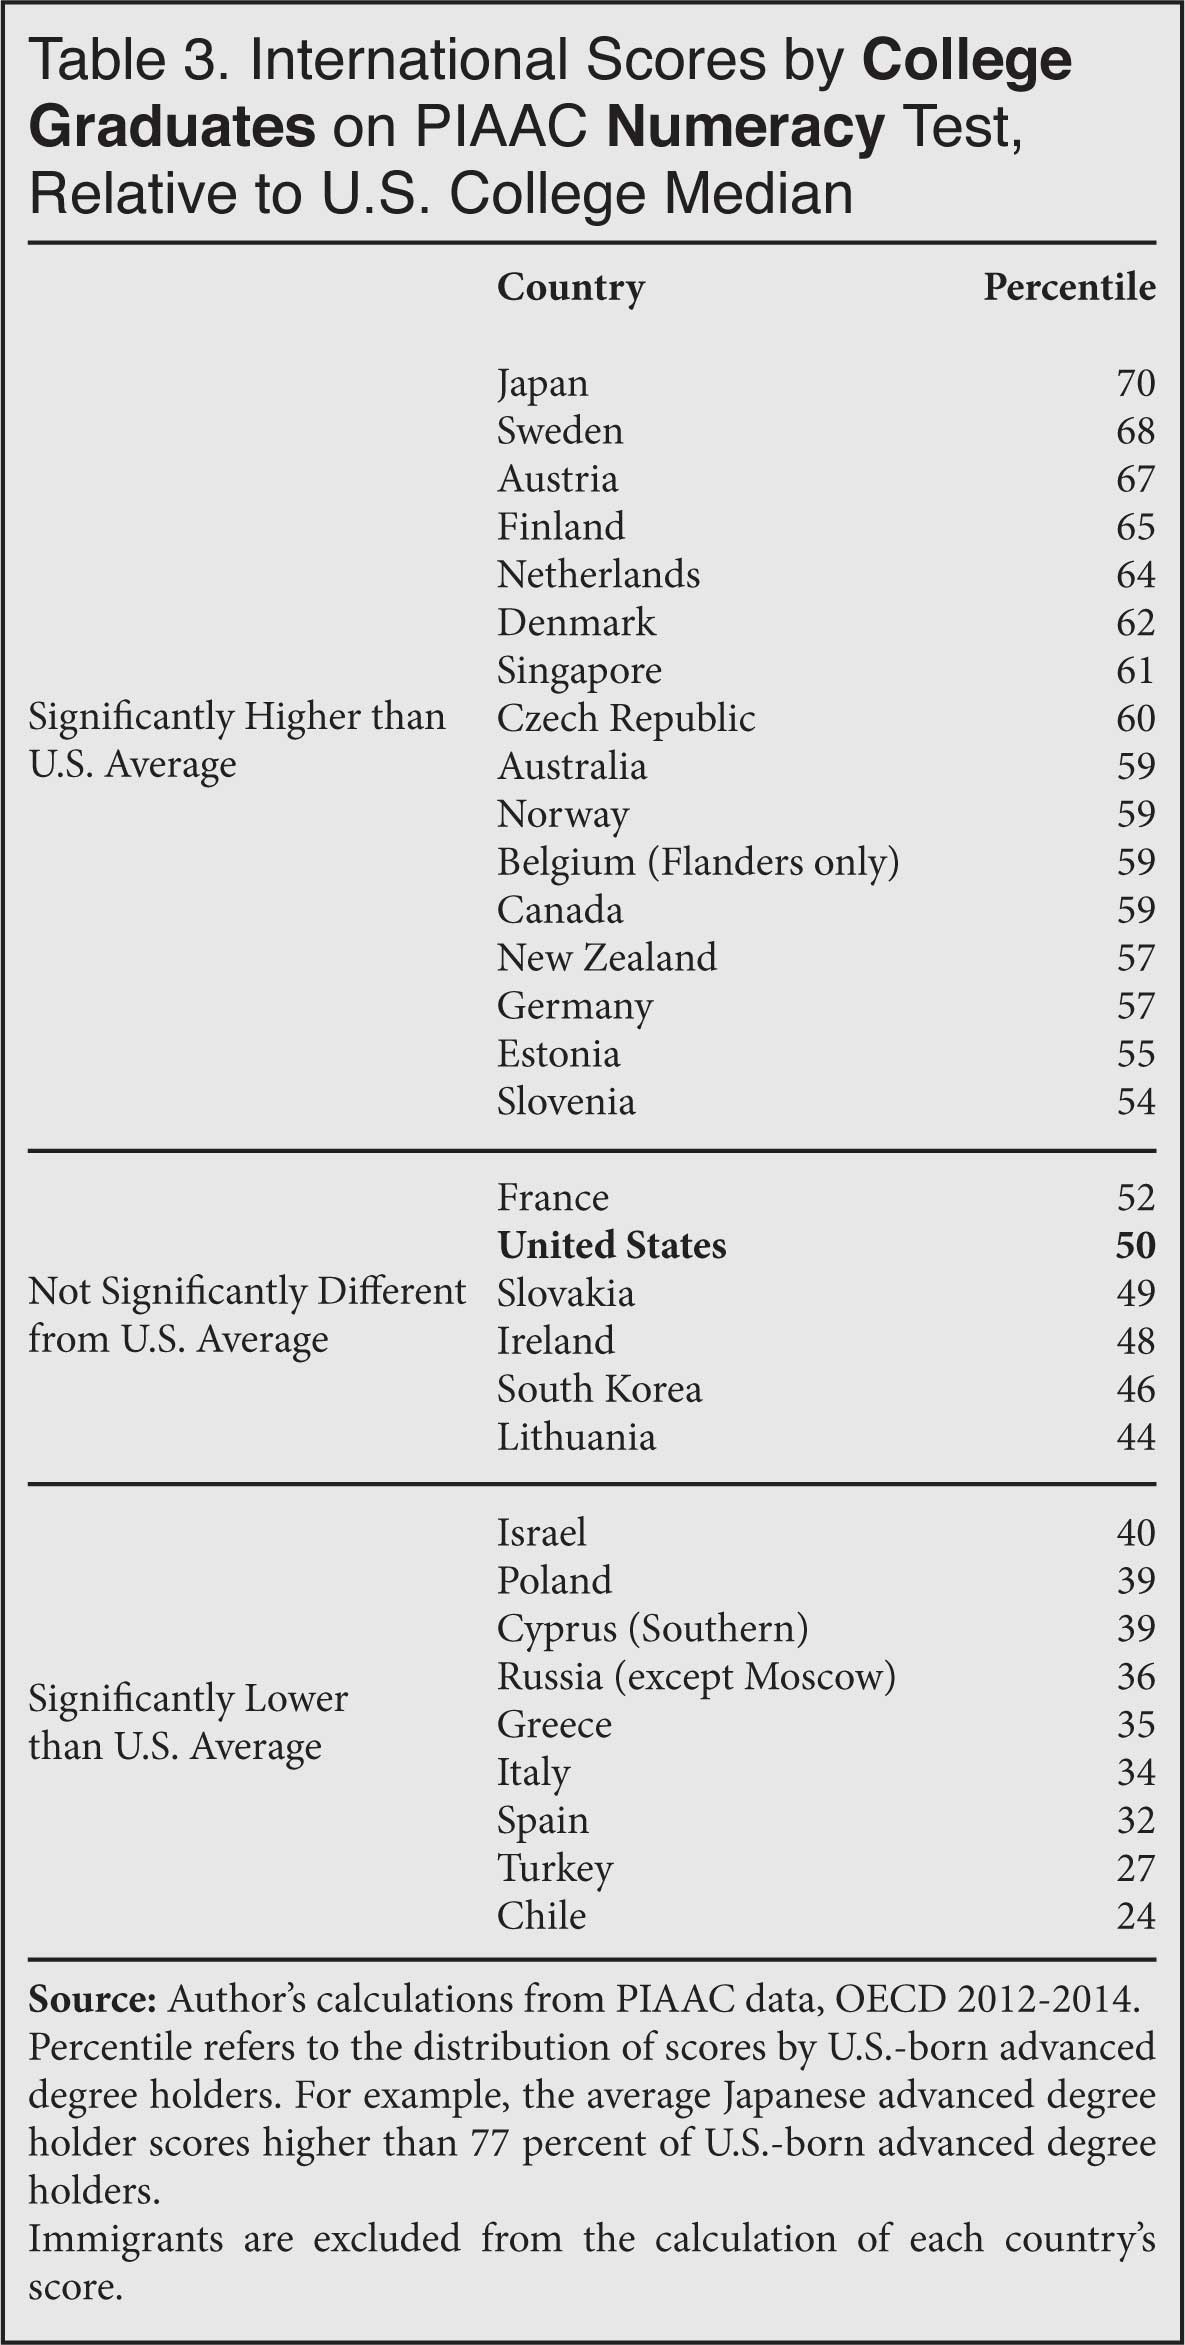 Table: International Scores by College Graduates on PIACC Numeracy Test, Relative to US College Median